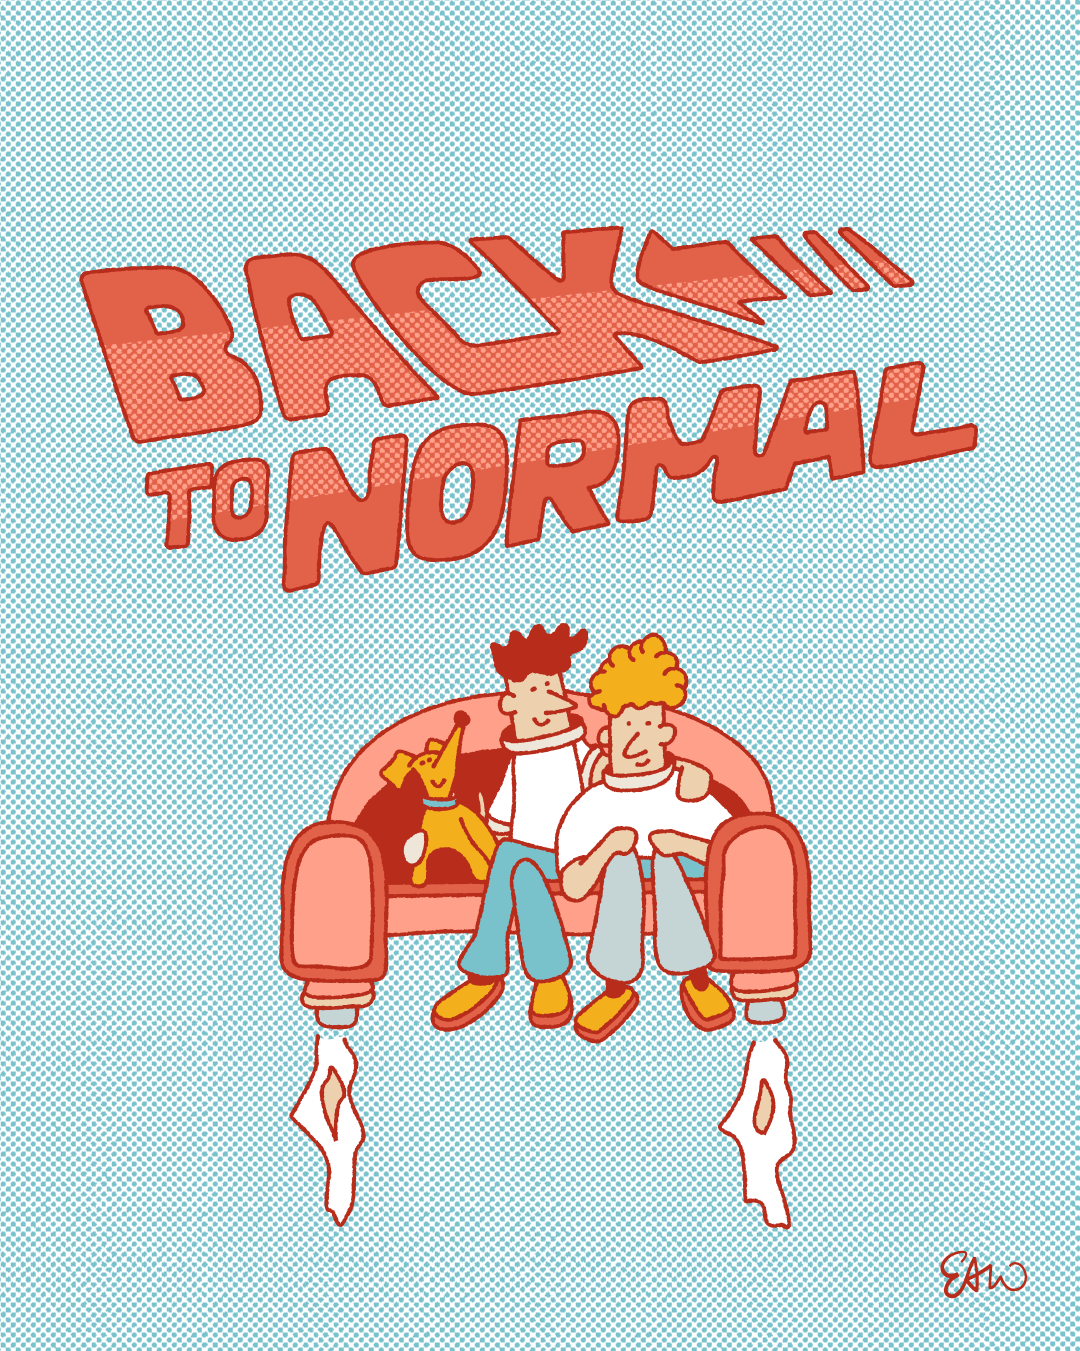 Cartoon illustration drawn in a retro style with a minimal palette of faded blues, reds and yellows with halftones for shading. A movie title set in the same font treatment as “Back to the Future” reads instead, “Back to Normal.” In the foreground, a couple sits on the couch with their dog. The couch hovers in the centre of the composition and appears to have rockets on its legs, causing it to levitate.